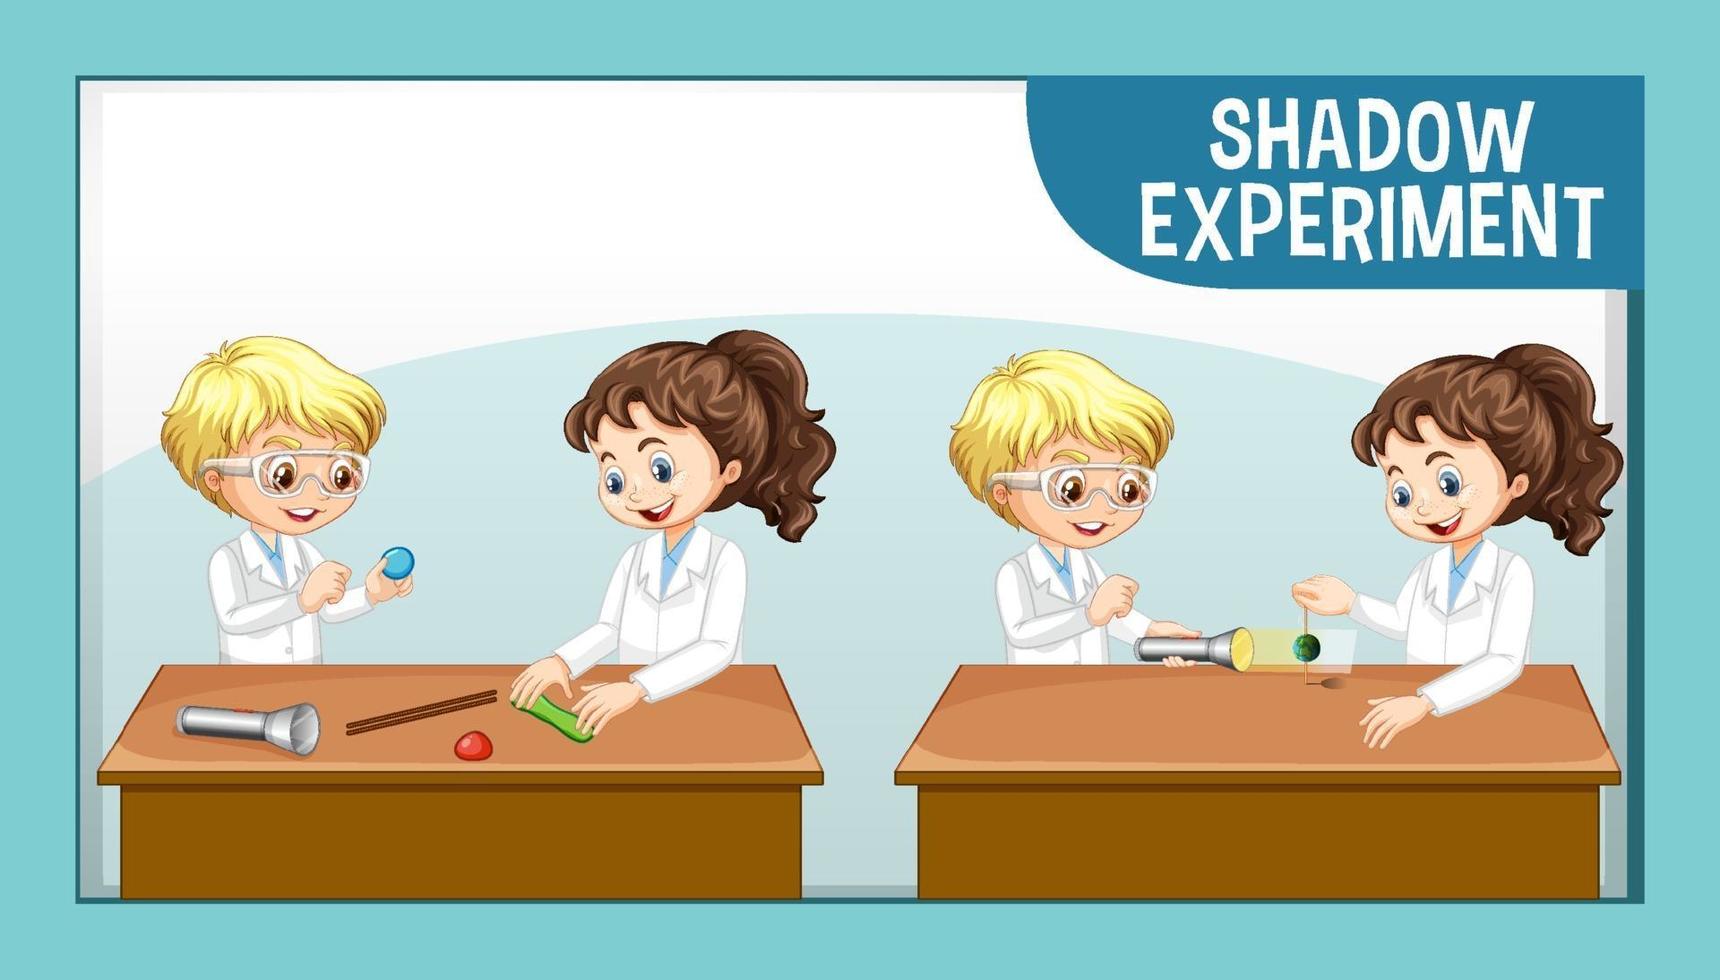 Shadow experiment with scientist kids cartoon character vector